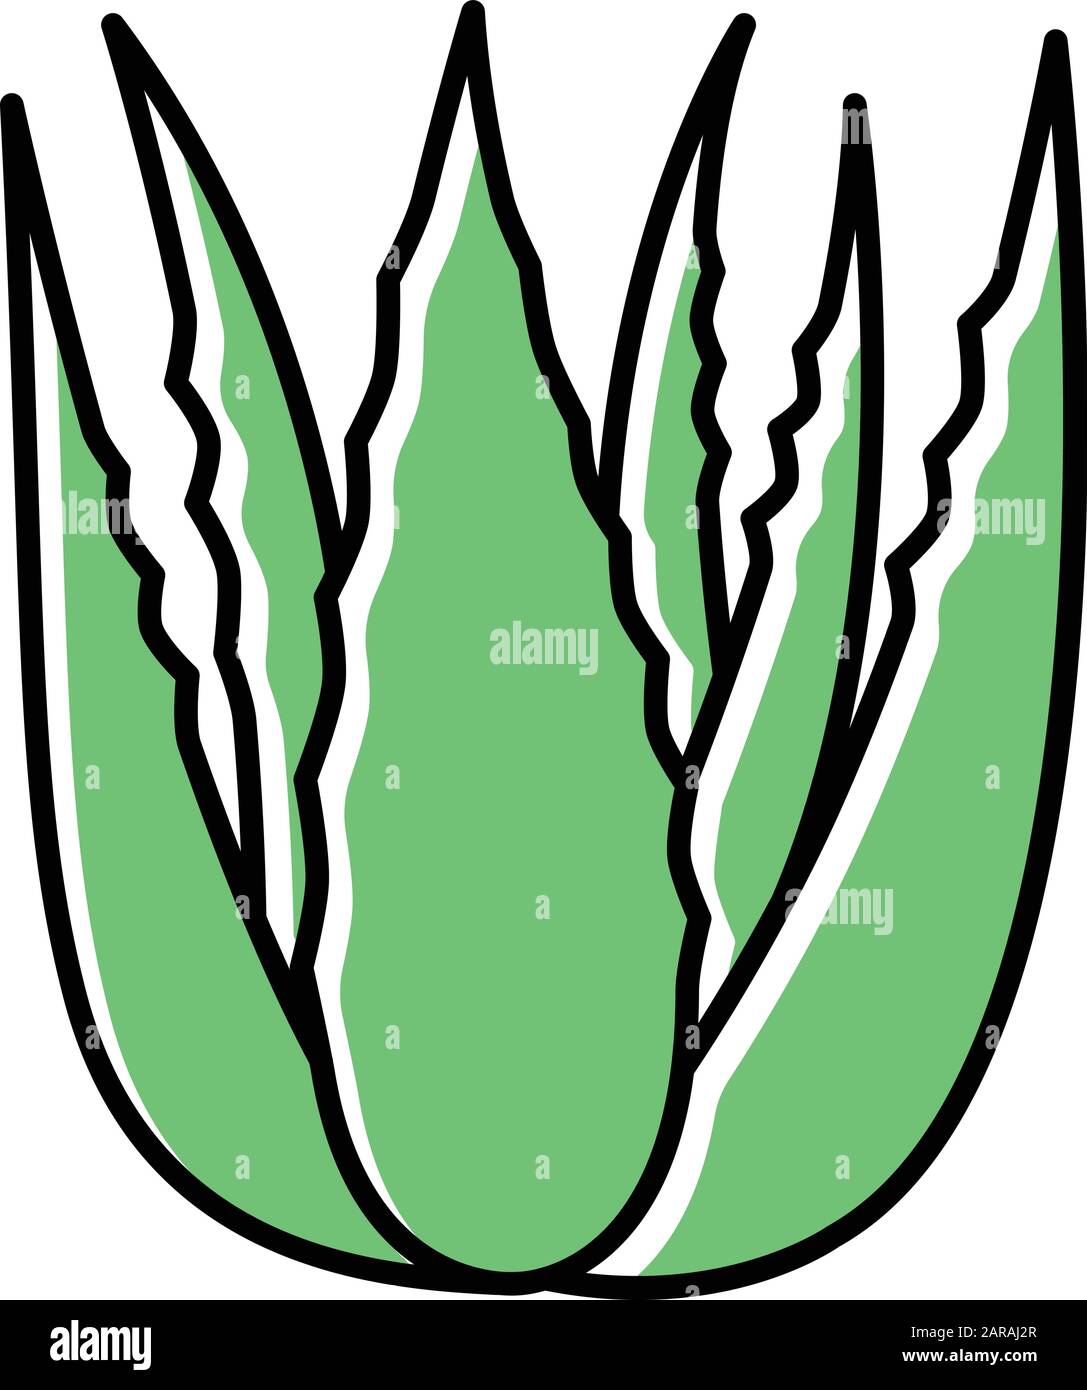 Succulent sprouts green color icon. Growing aloe vera. Cactus leafs and medicinal herb. Decorative plant. Botanics, flora. Ingredient for vegan cosmet Stock Vector